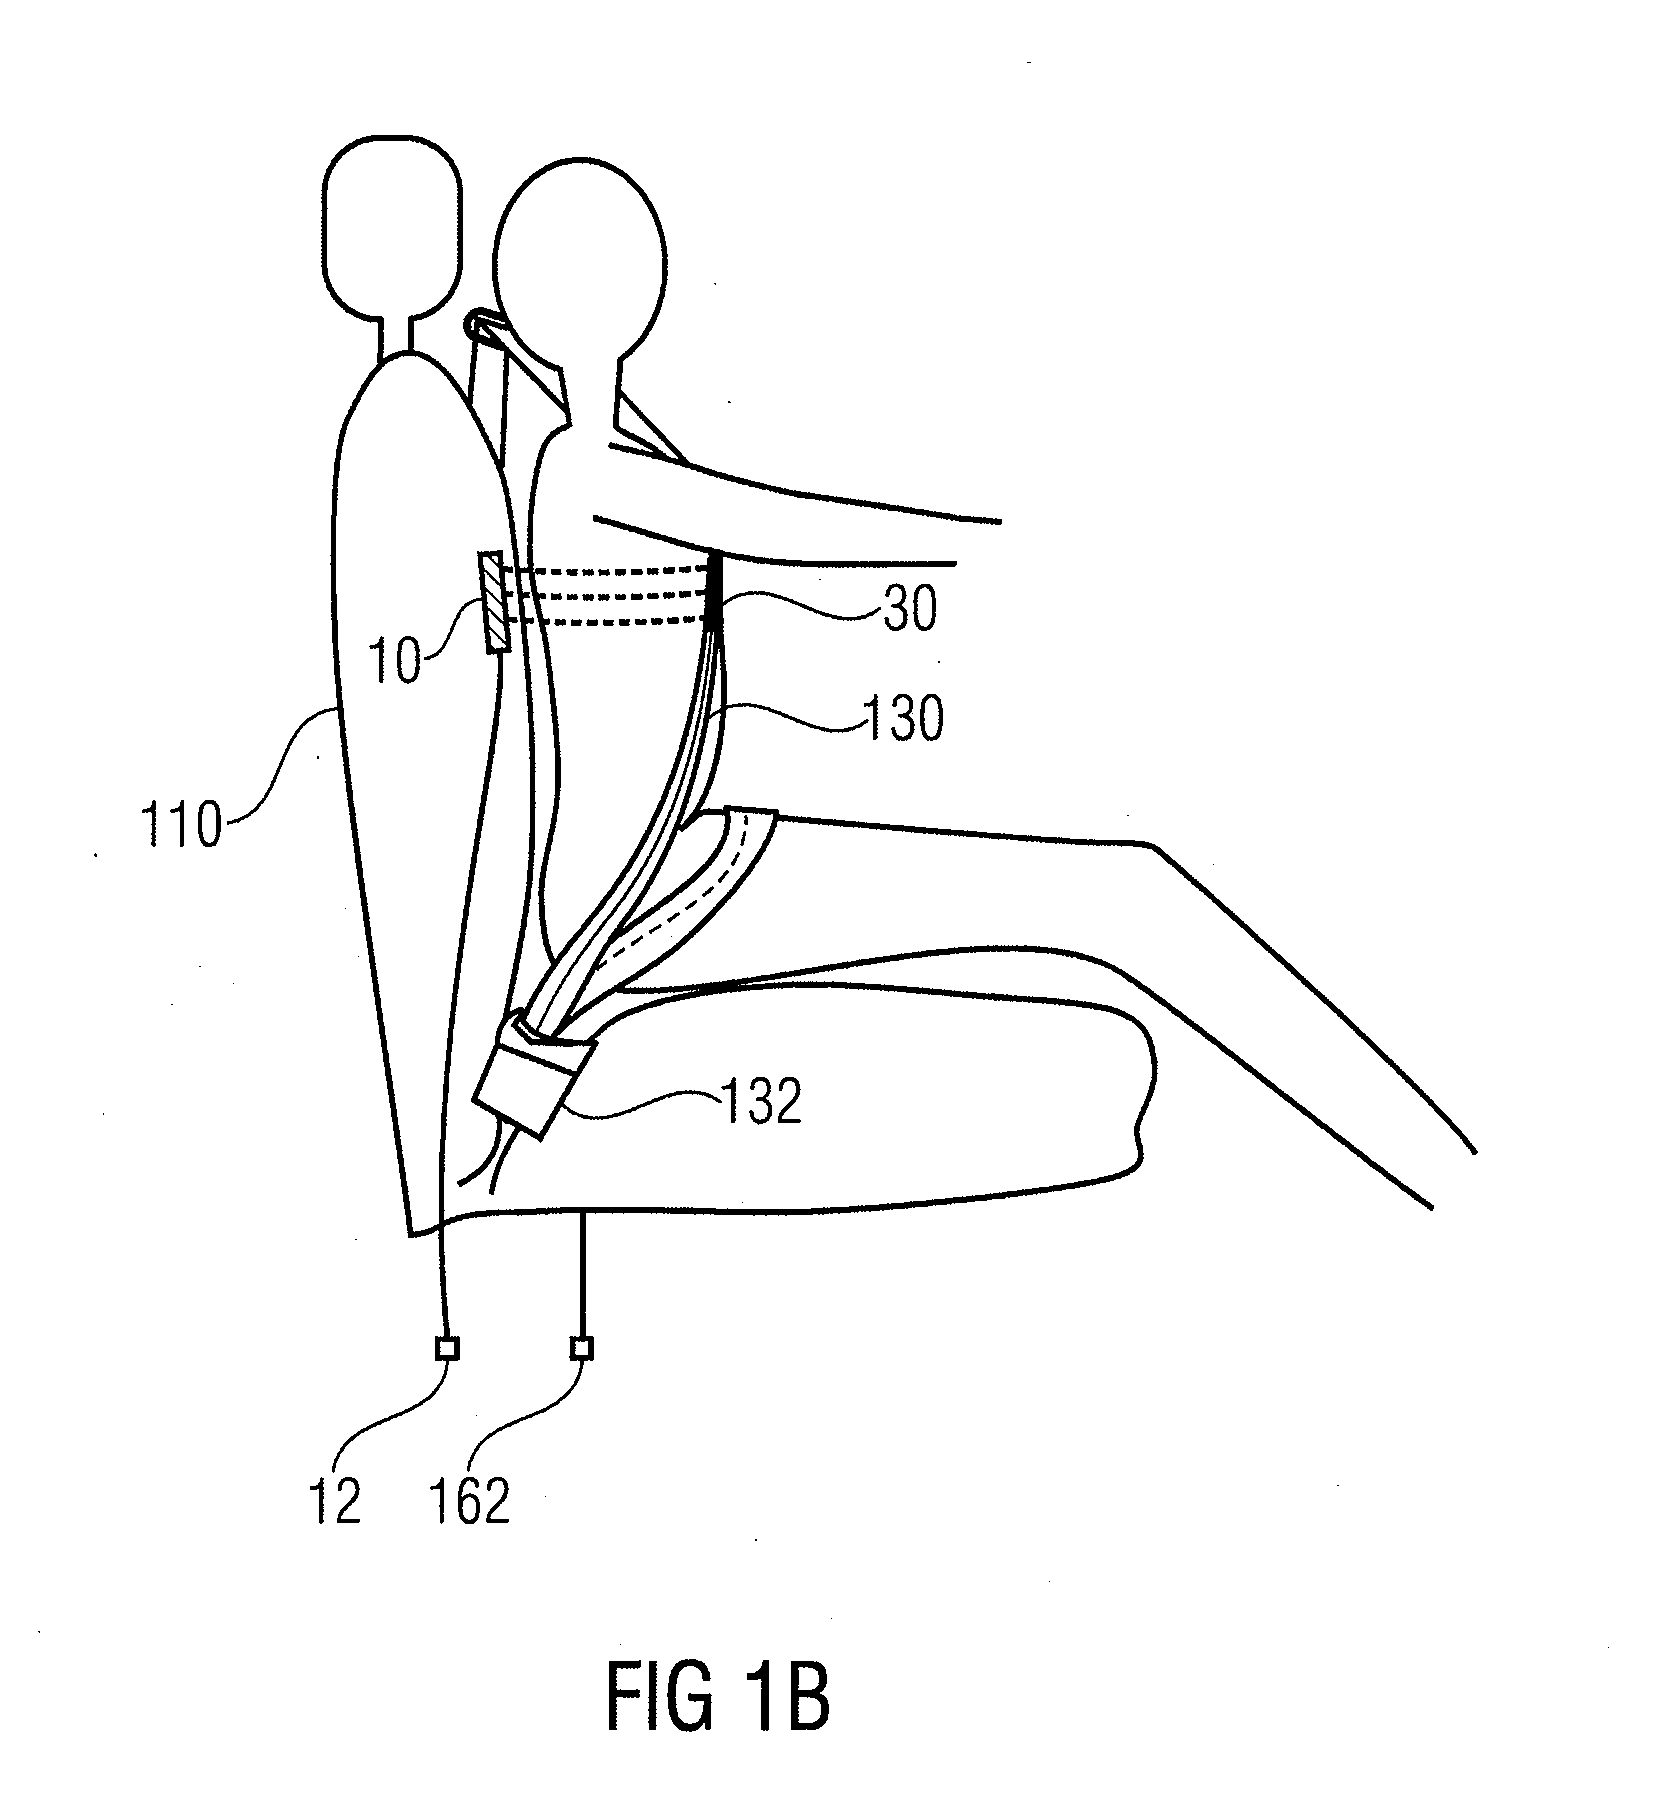 Device and method for sensing respiration of a living being